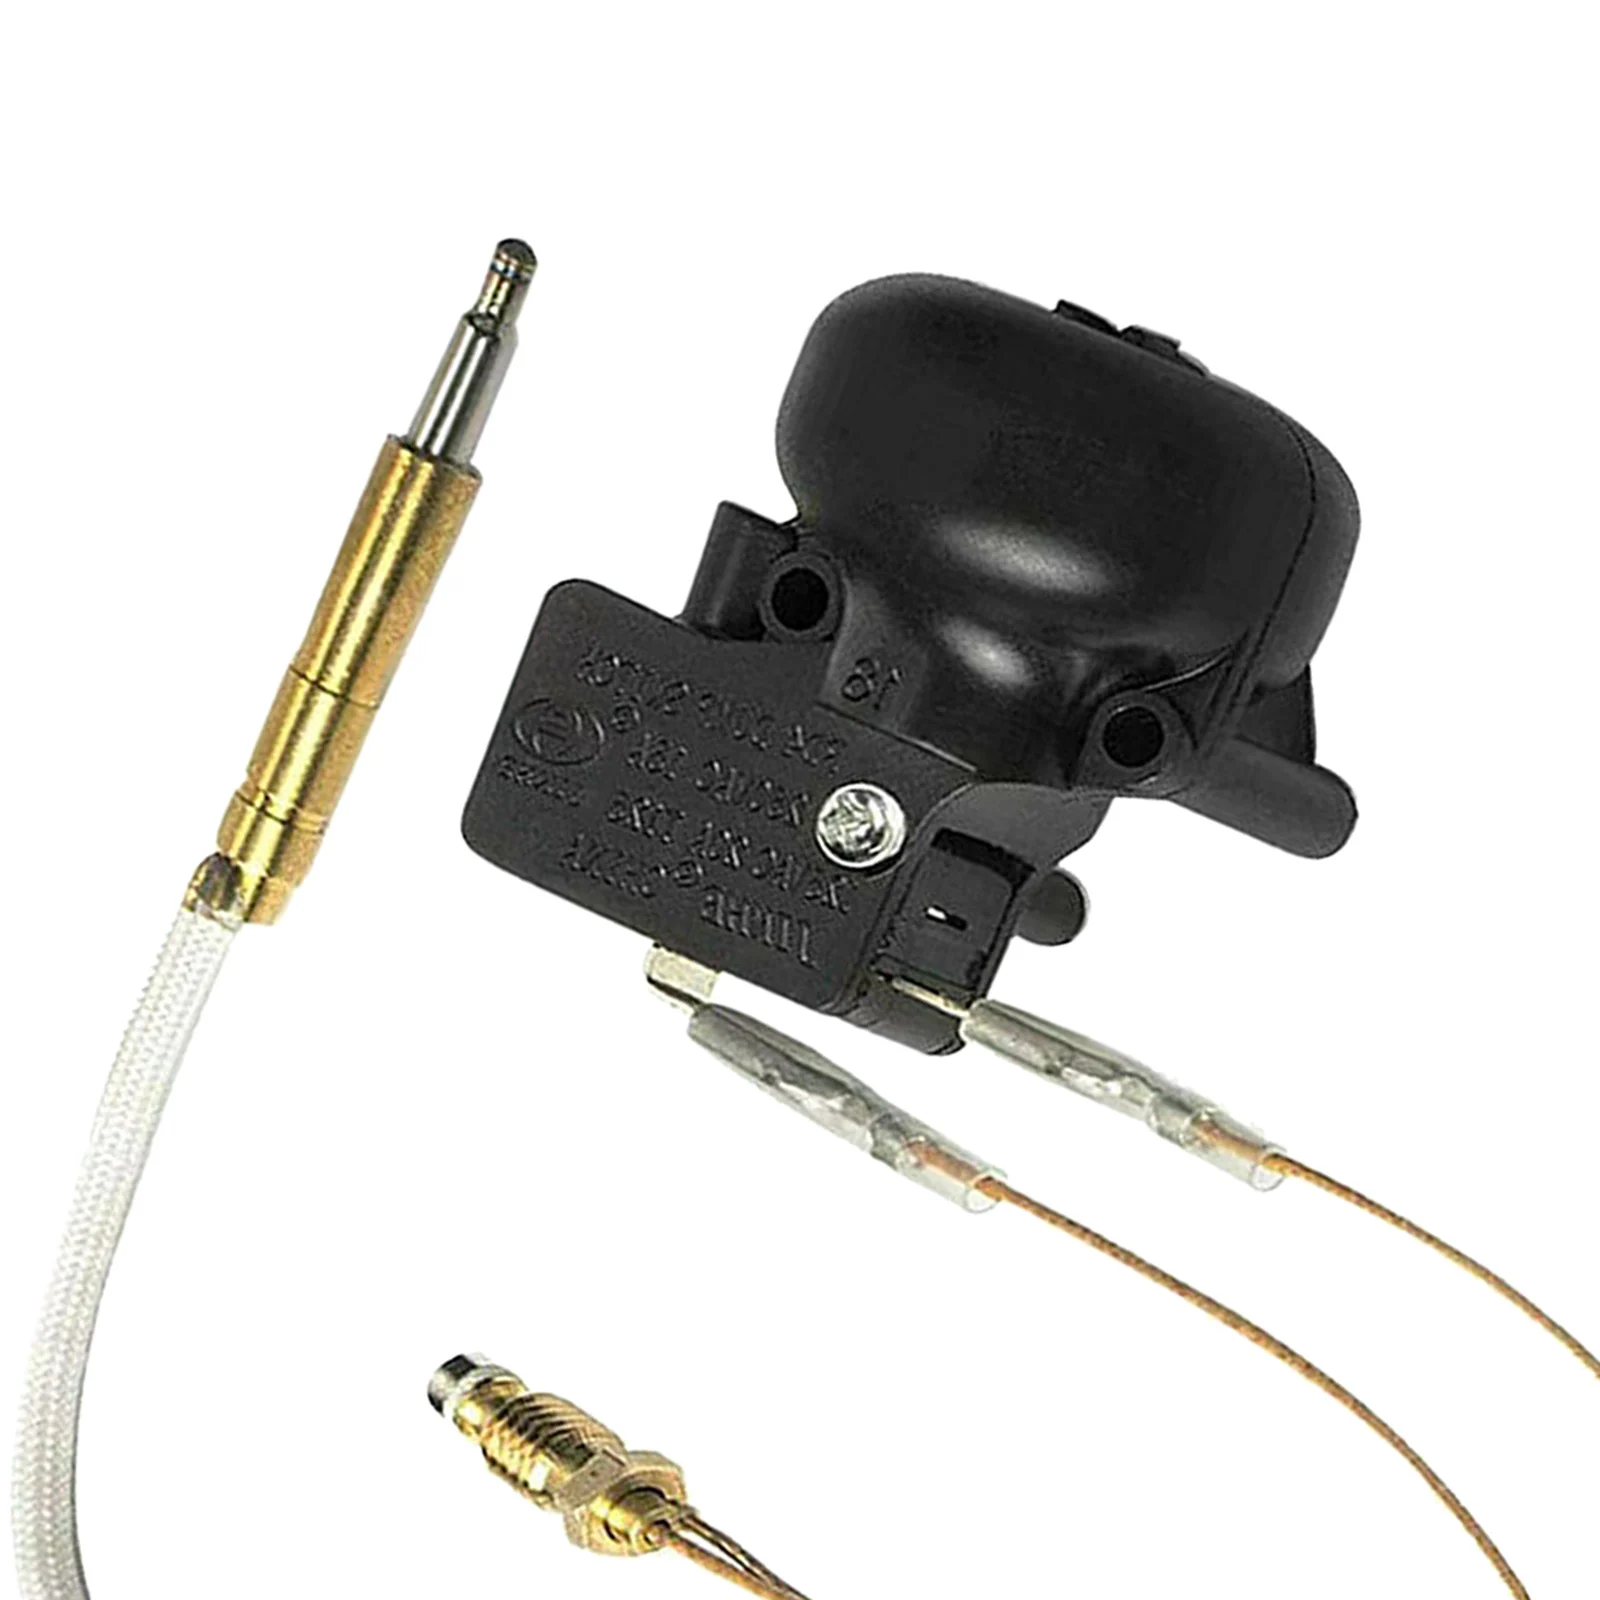 Thermocouple and Tilt Switch for Patio Heater Propane Heater Outdoor Gas Heater, Thermocouple Repair Kit for Patio Heater